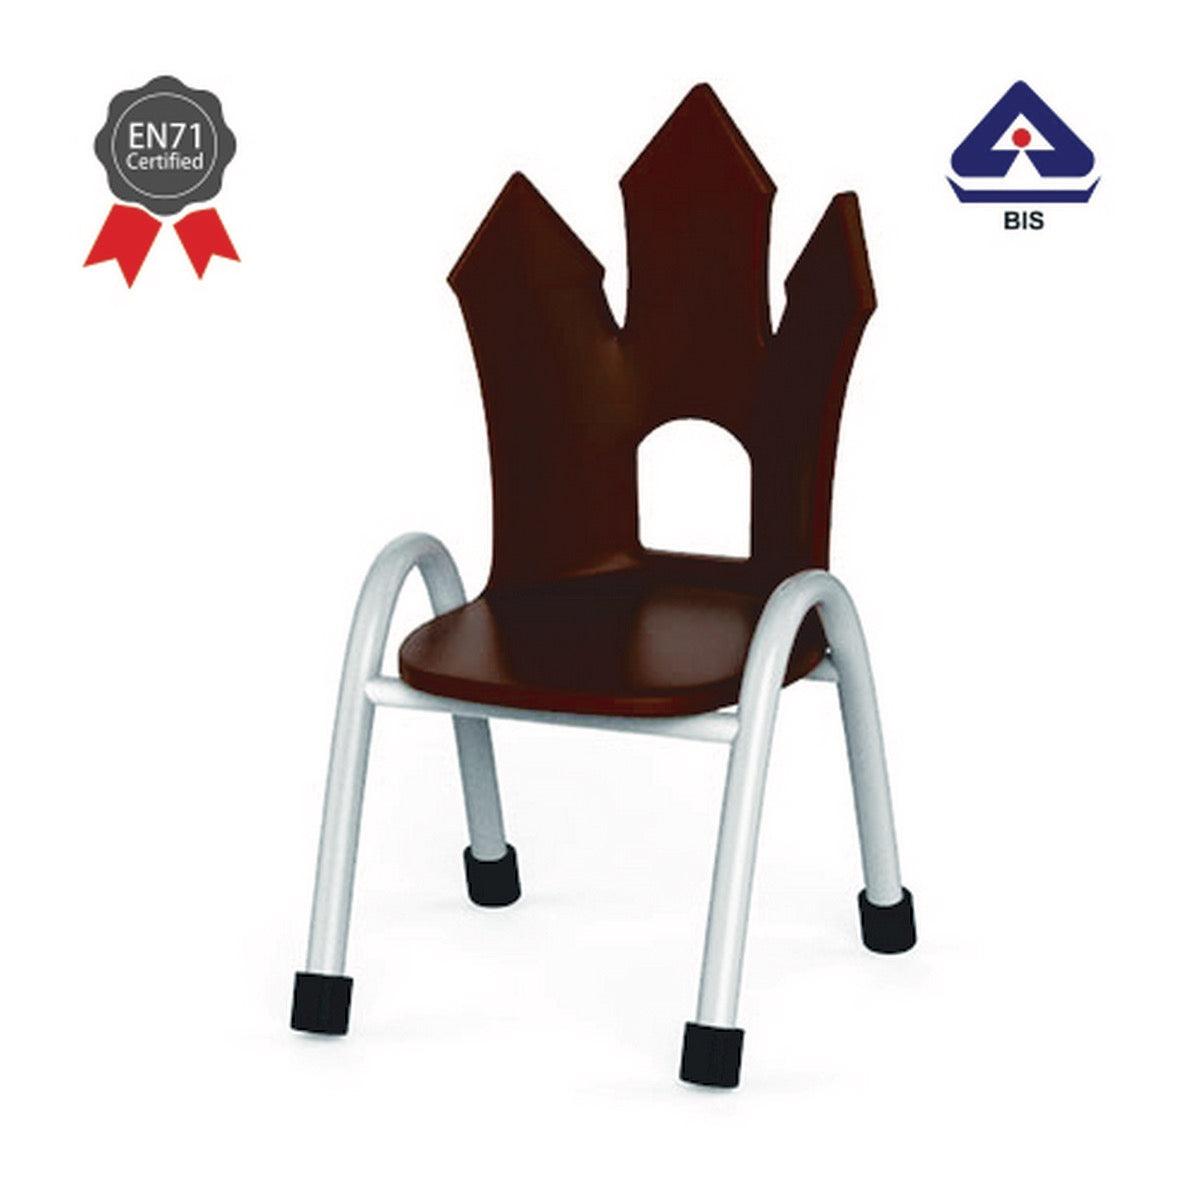 Ok Play Castle Chair, Study Chair, Sturdy And Durable Chair, Plastic Chair, Perfect For Home, Creches And School, Brown, 2 to 4 Years, Height 8 Inches